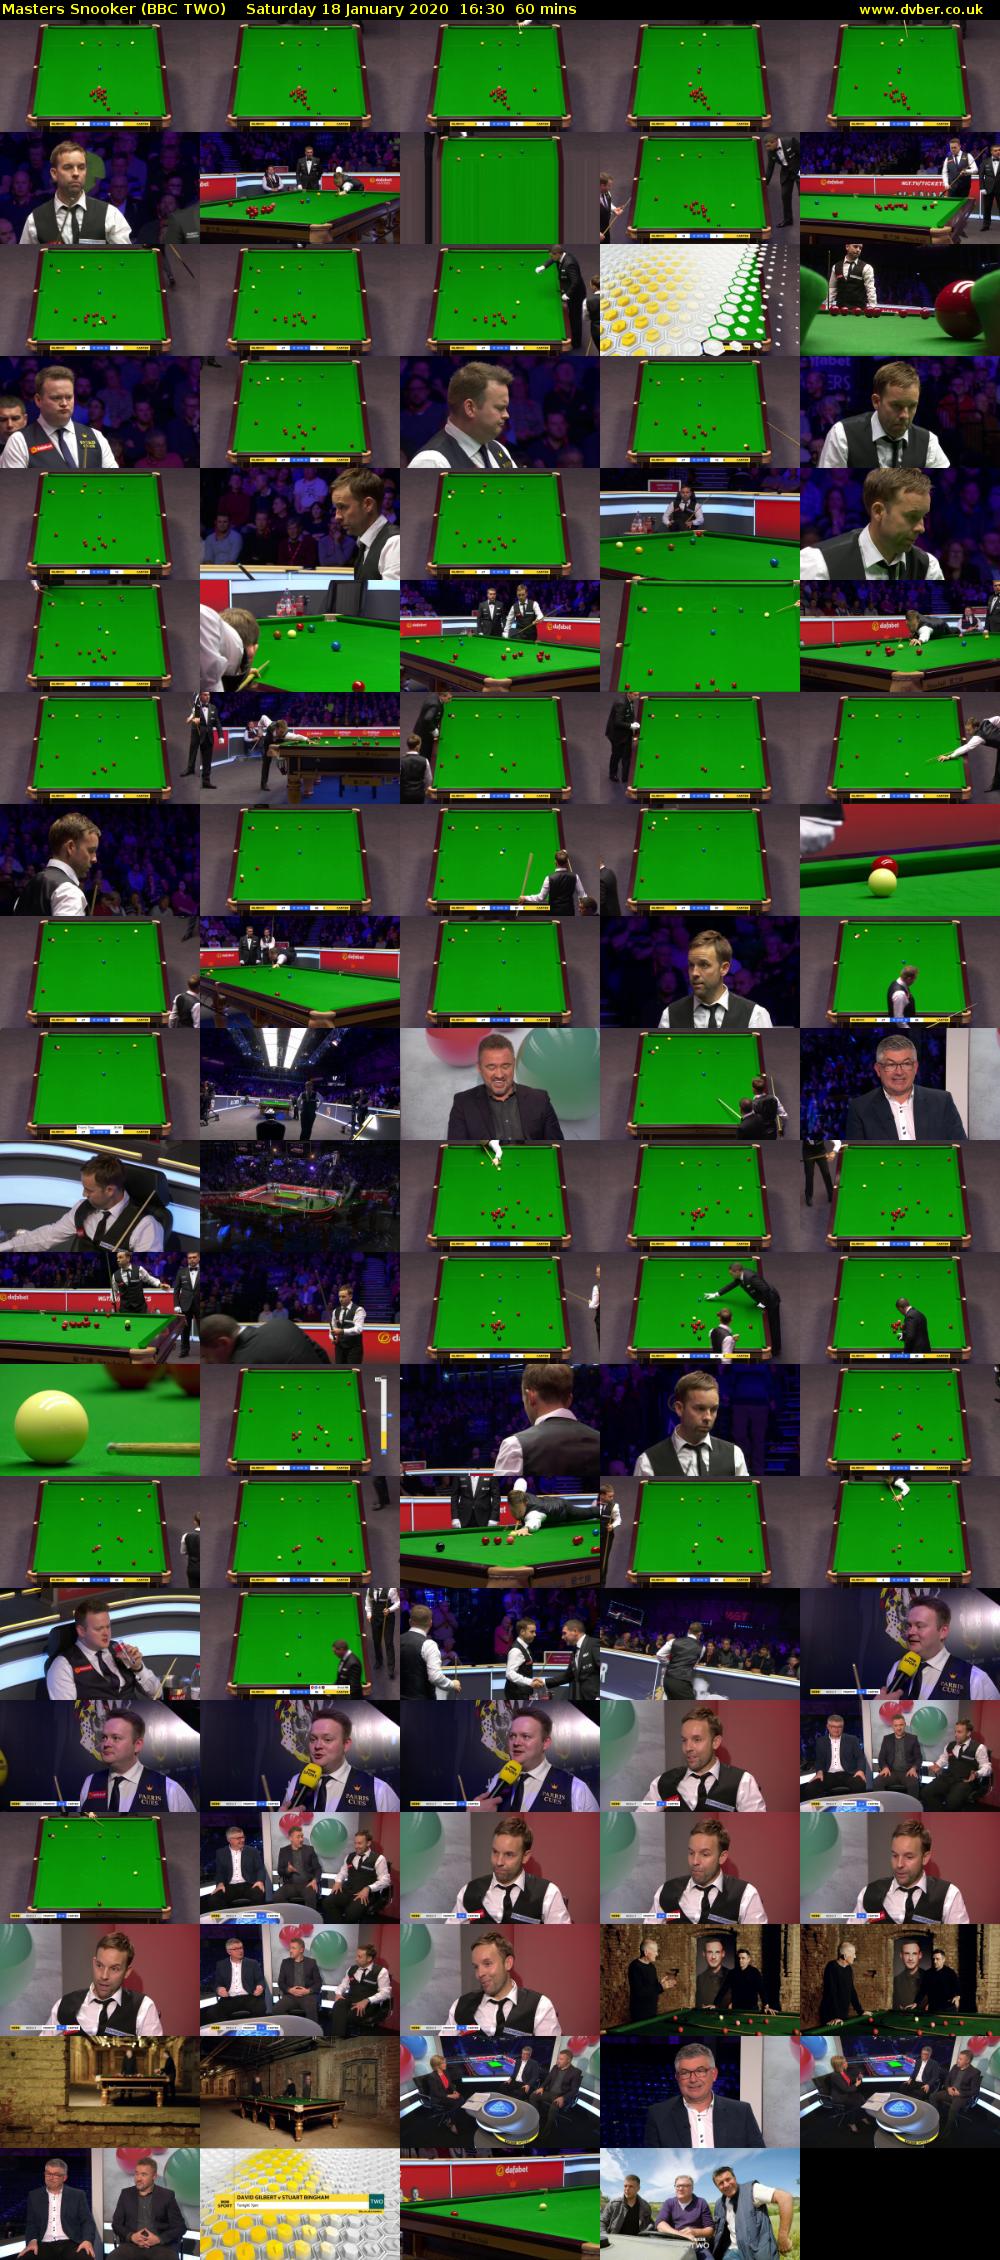 Masters Snooker (BBC TWO) Saturday 18 January 2020 16:30 - 17:30